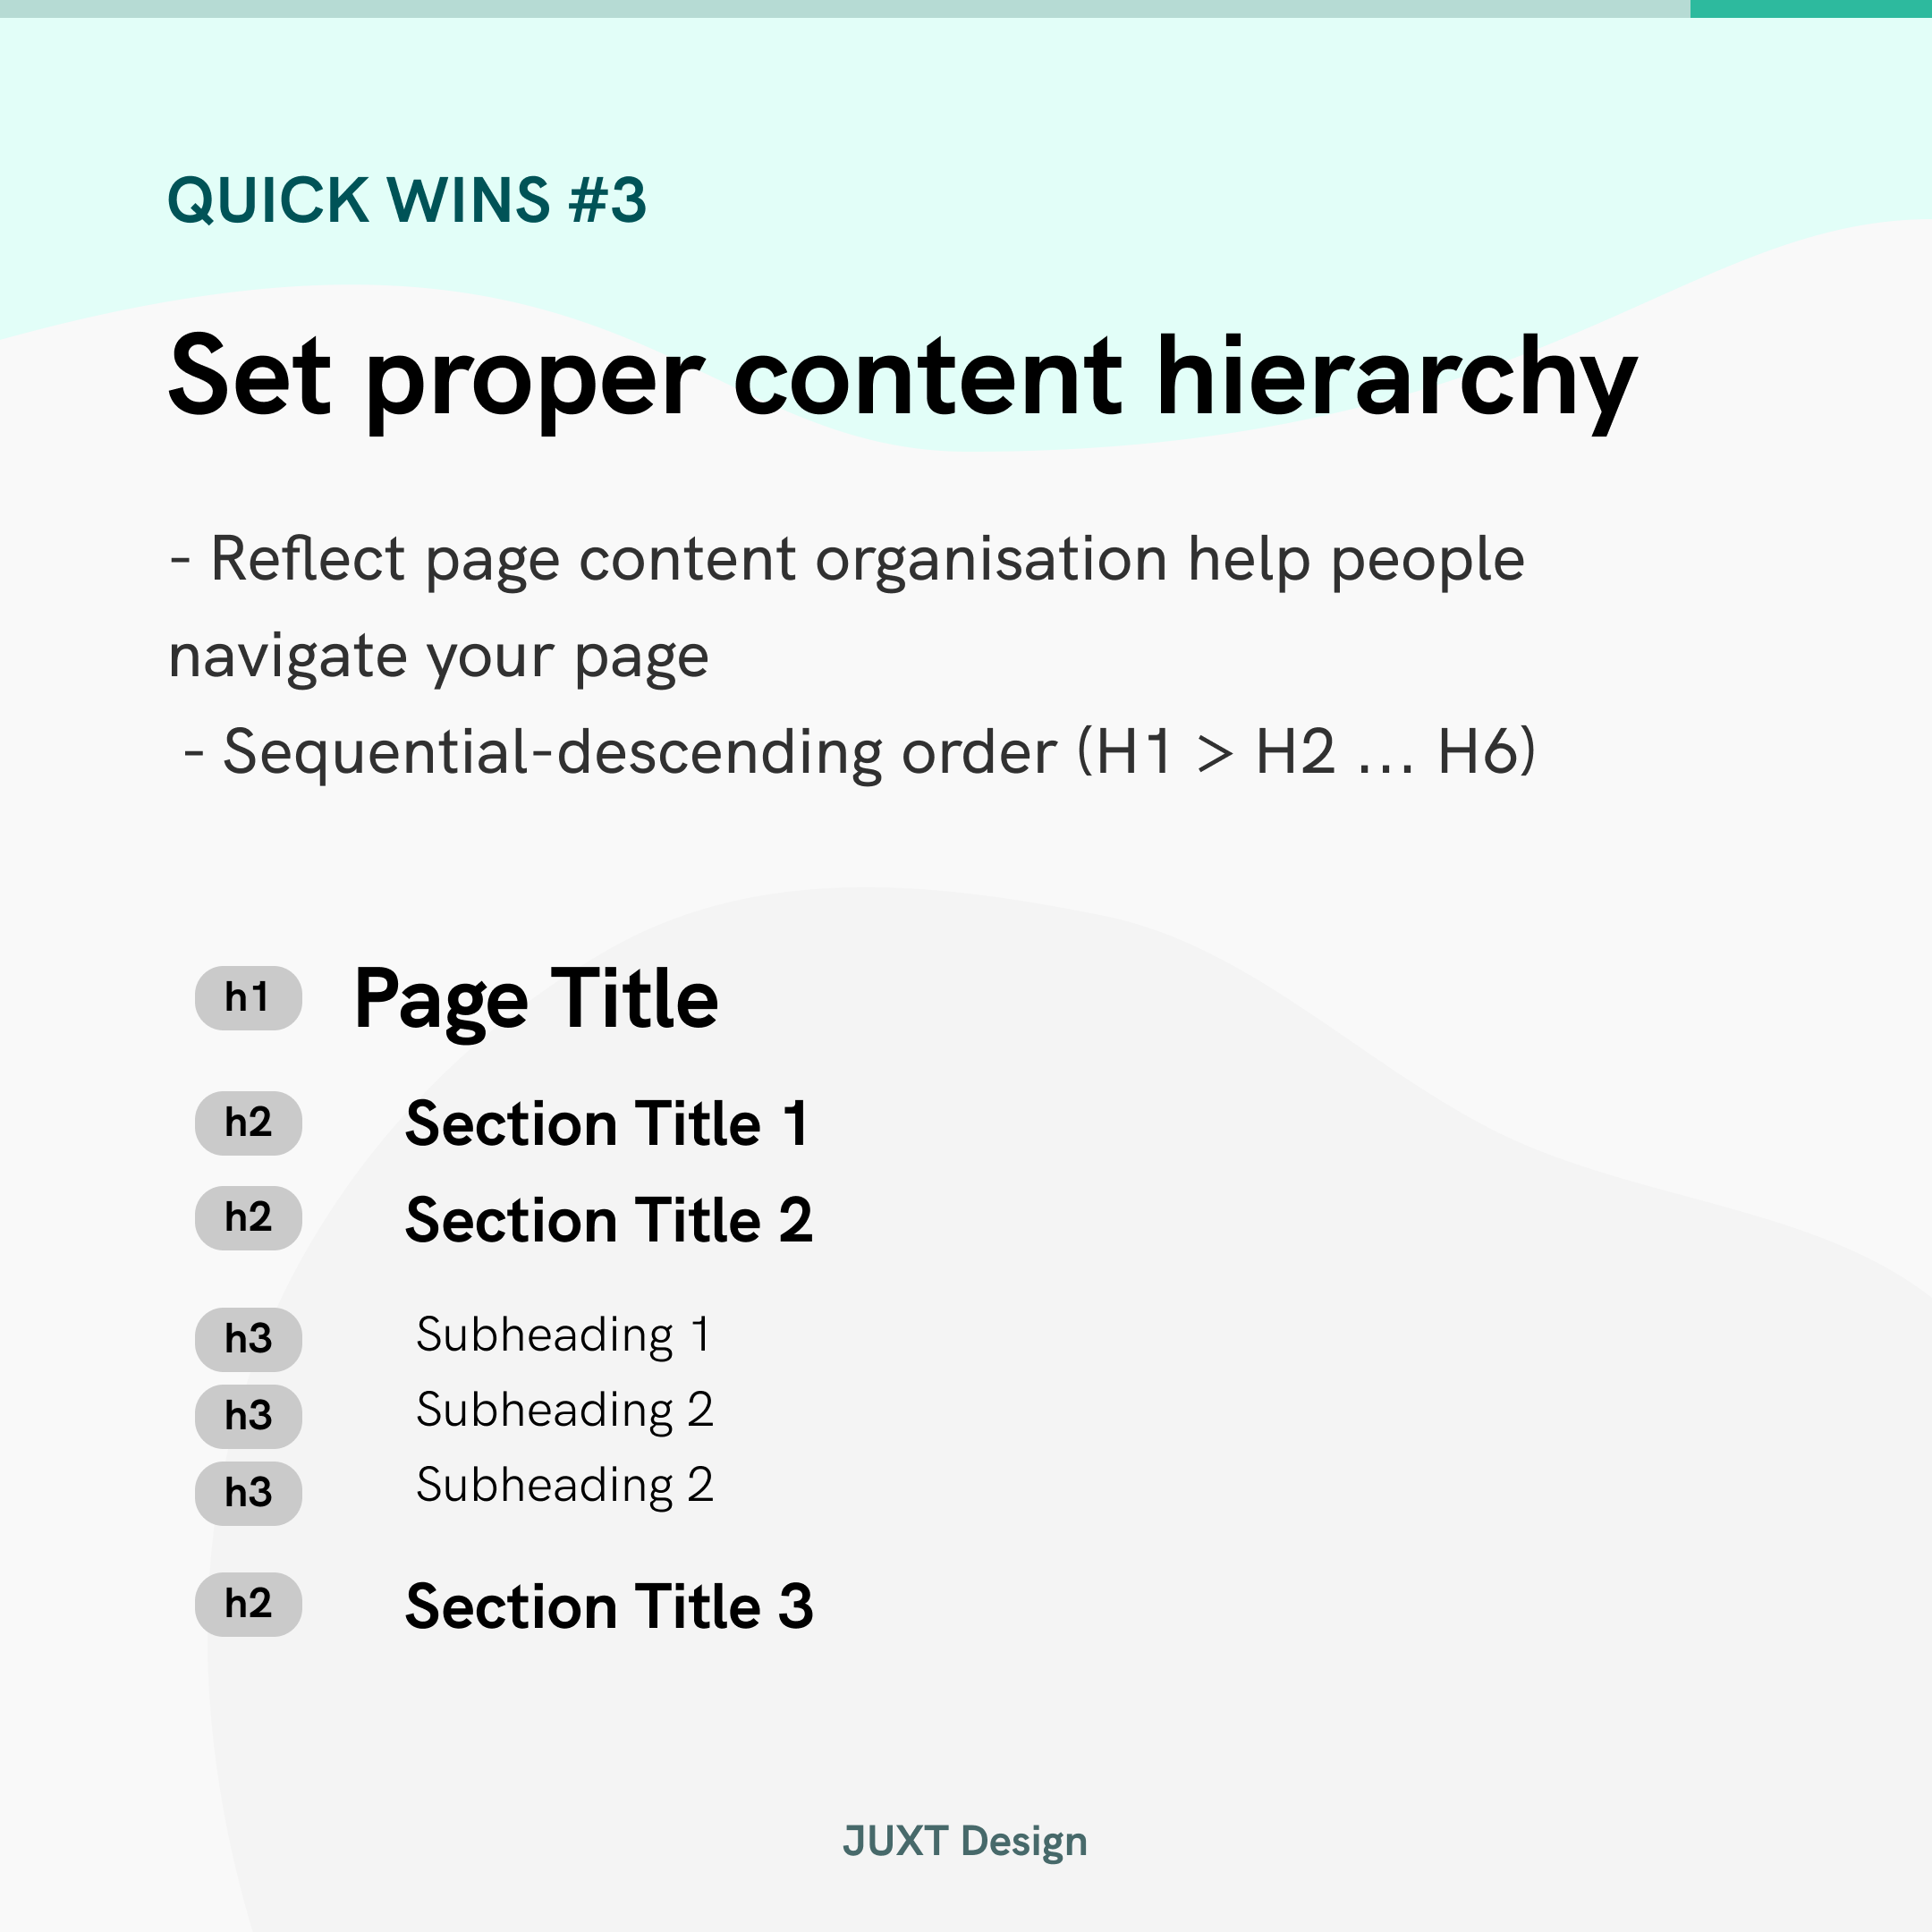 Set proper content hierarchy. Reflect page content organisation help people navigate your page